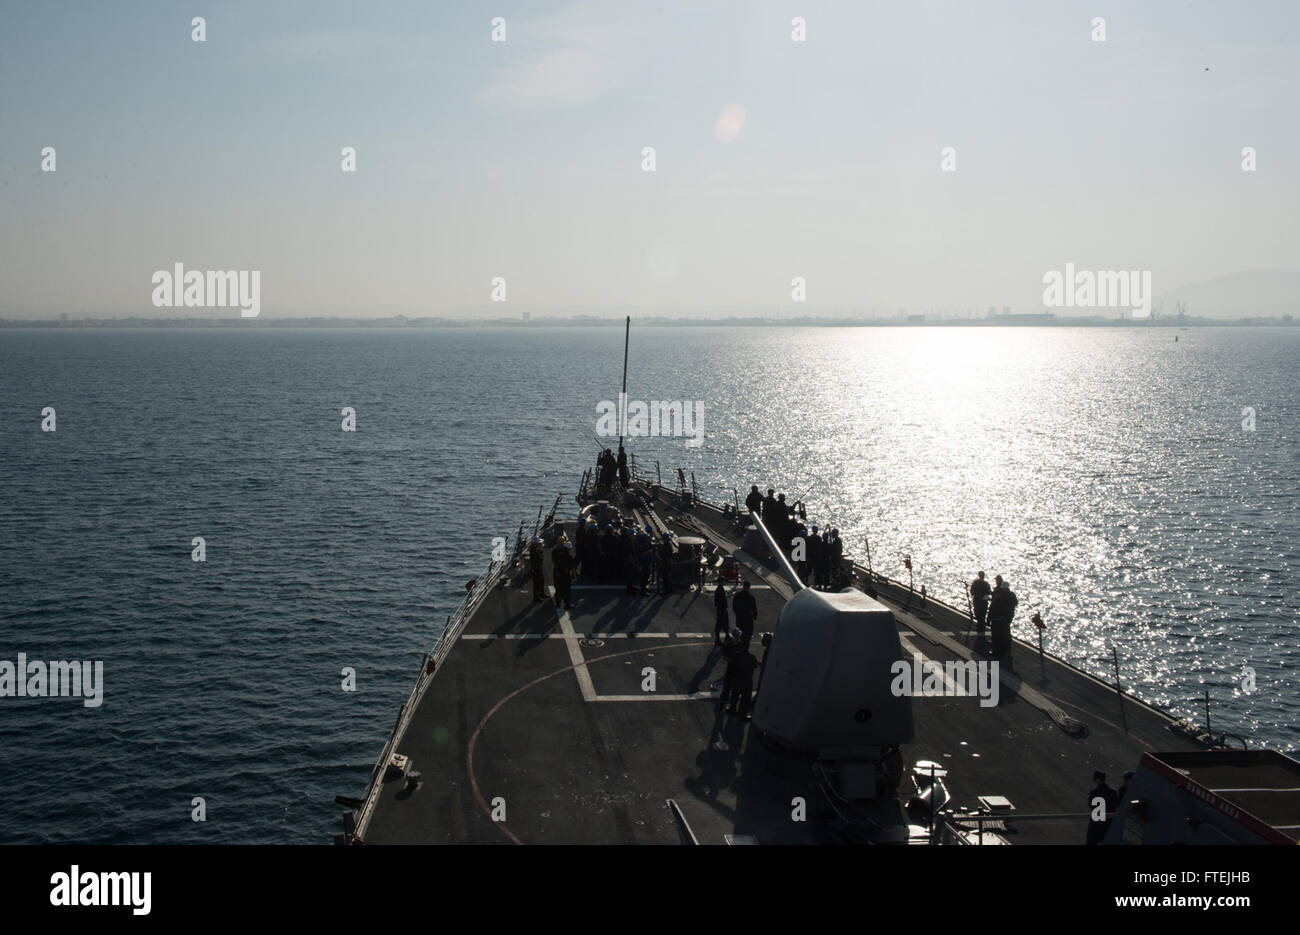 MEDITERRANEAN SEA (Dec. 7, 2014) - USS Donald Cook (DDG 75) prepares to pull in to Haifa, Israel for a scheduled port visit, Dec. 7, 2014. Donald Cook, an Arleigh Burke-class guided-missile destroyer, forward-deployed to Rota, Spain, is conducting naval operations in the U.S. 6th Fleet area of operations in support of U.S. national security interests in Europe. Stock Photo